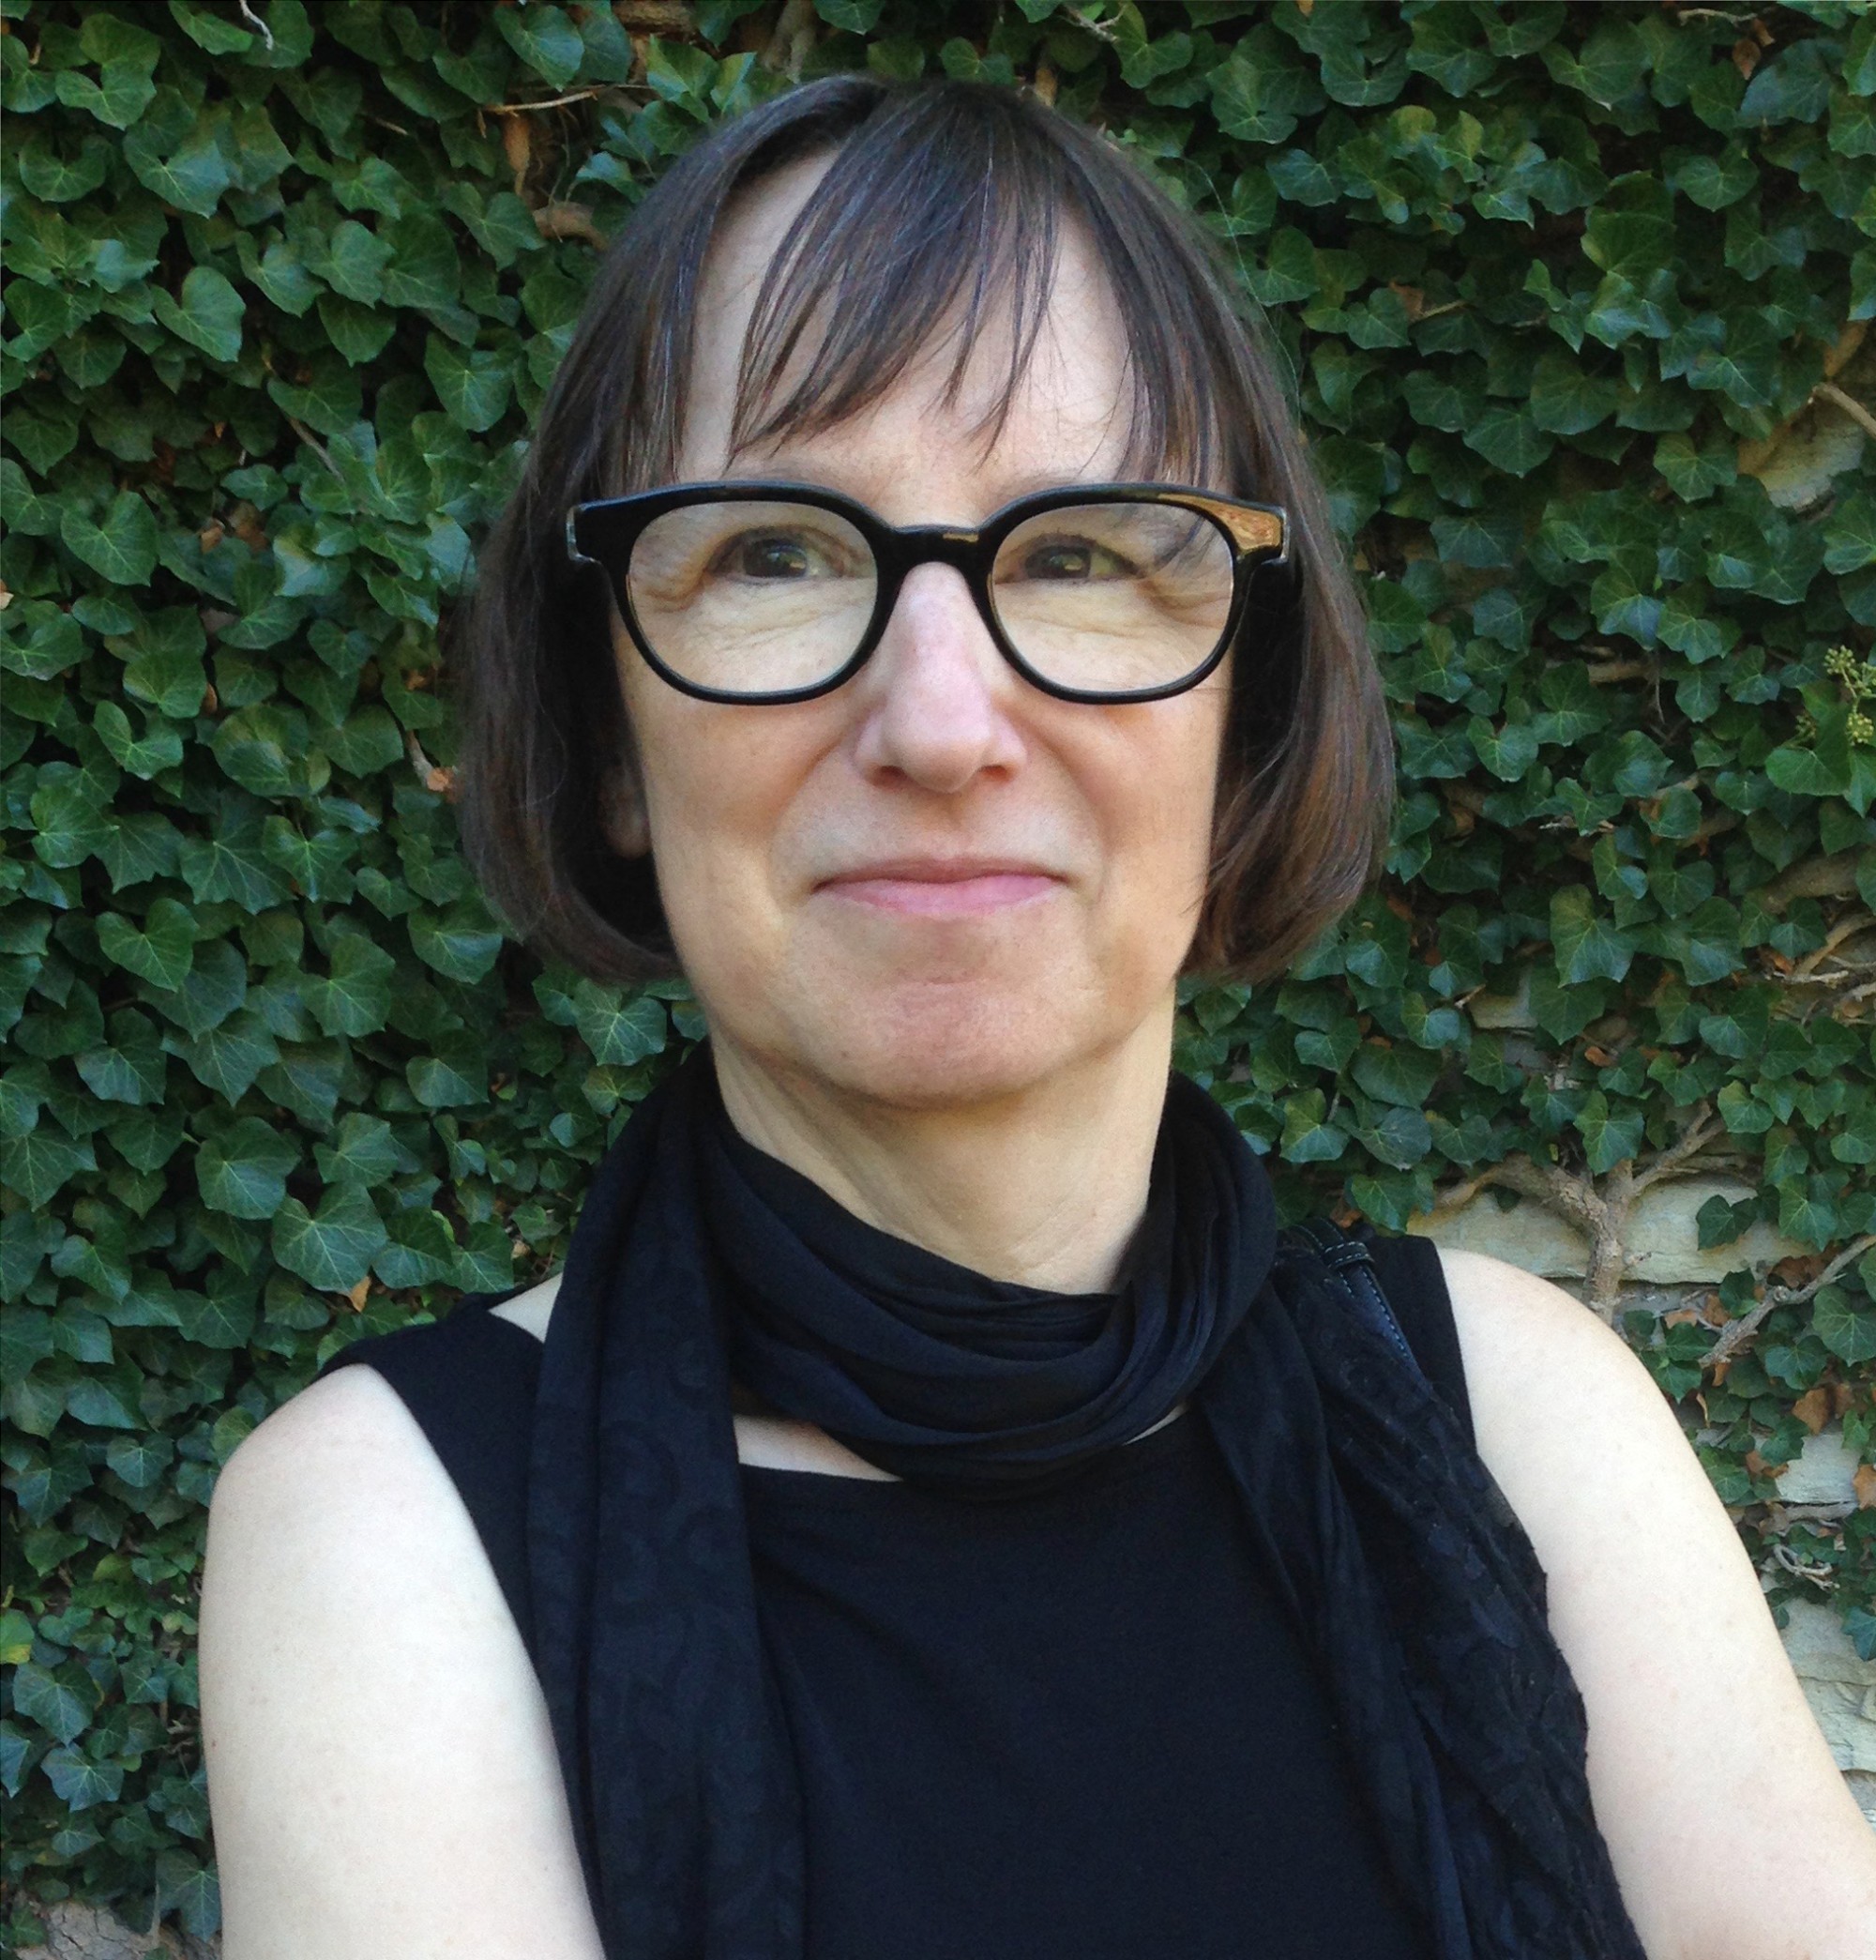 Evelyn is featured in a closely-cropped square portrait, cropped from chest up. She is wearing a black tank top, loose thin black scarf, and black glasses. She is looking just slightly off from the camera and smiling. Behind her is a wall of ivy.